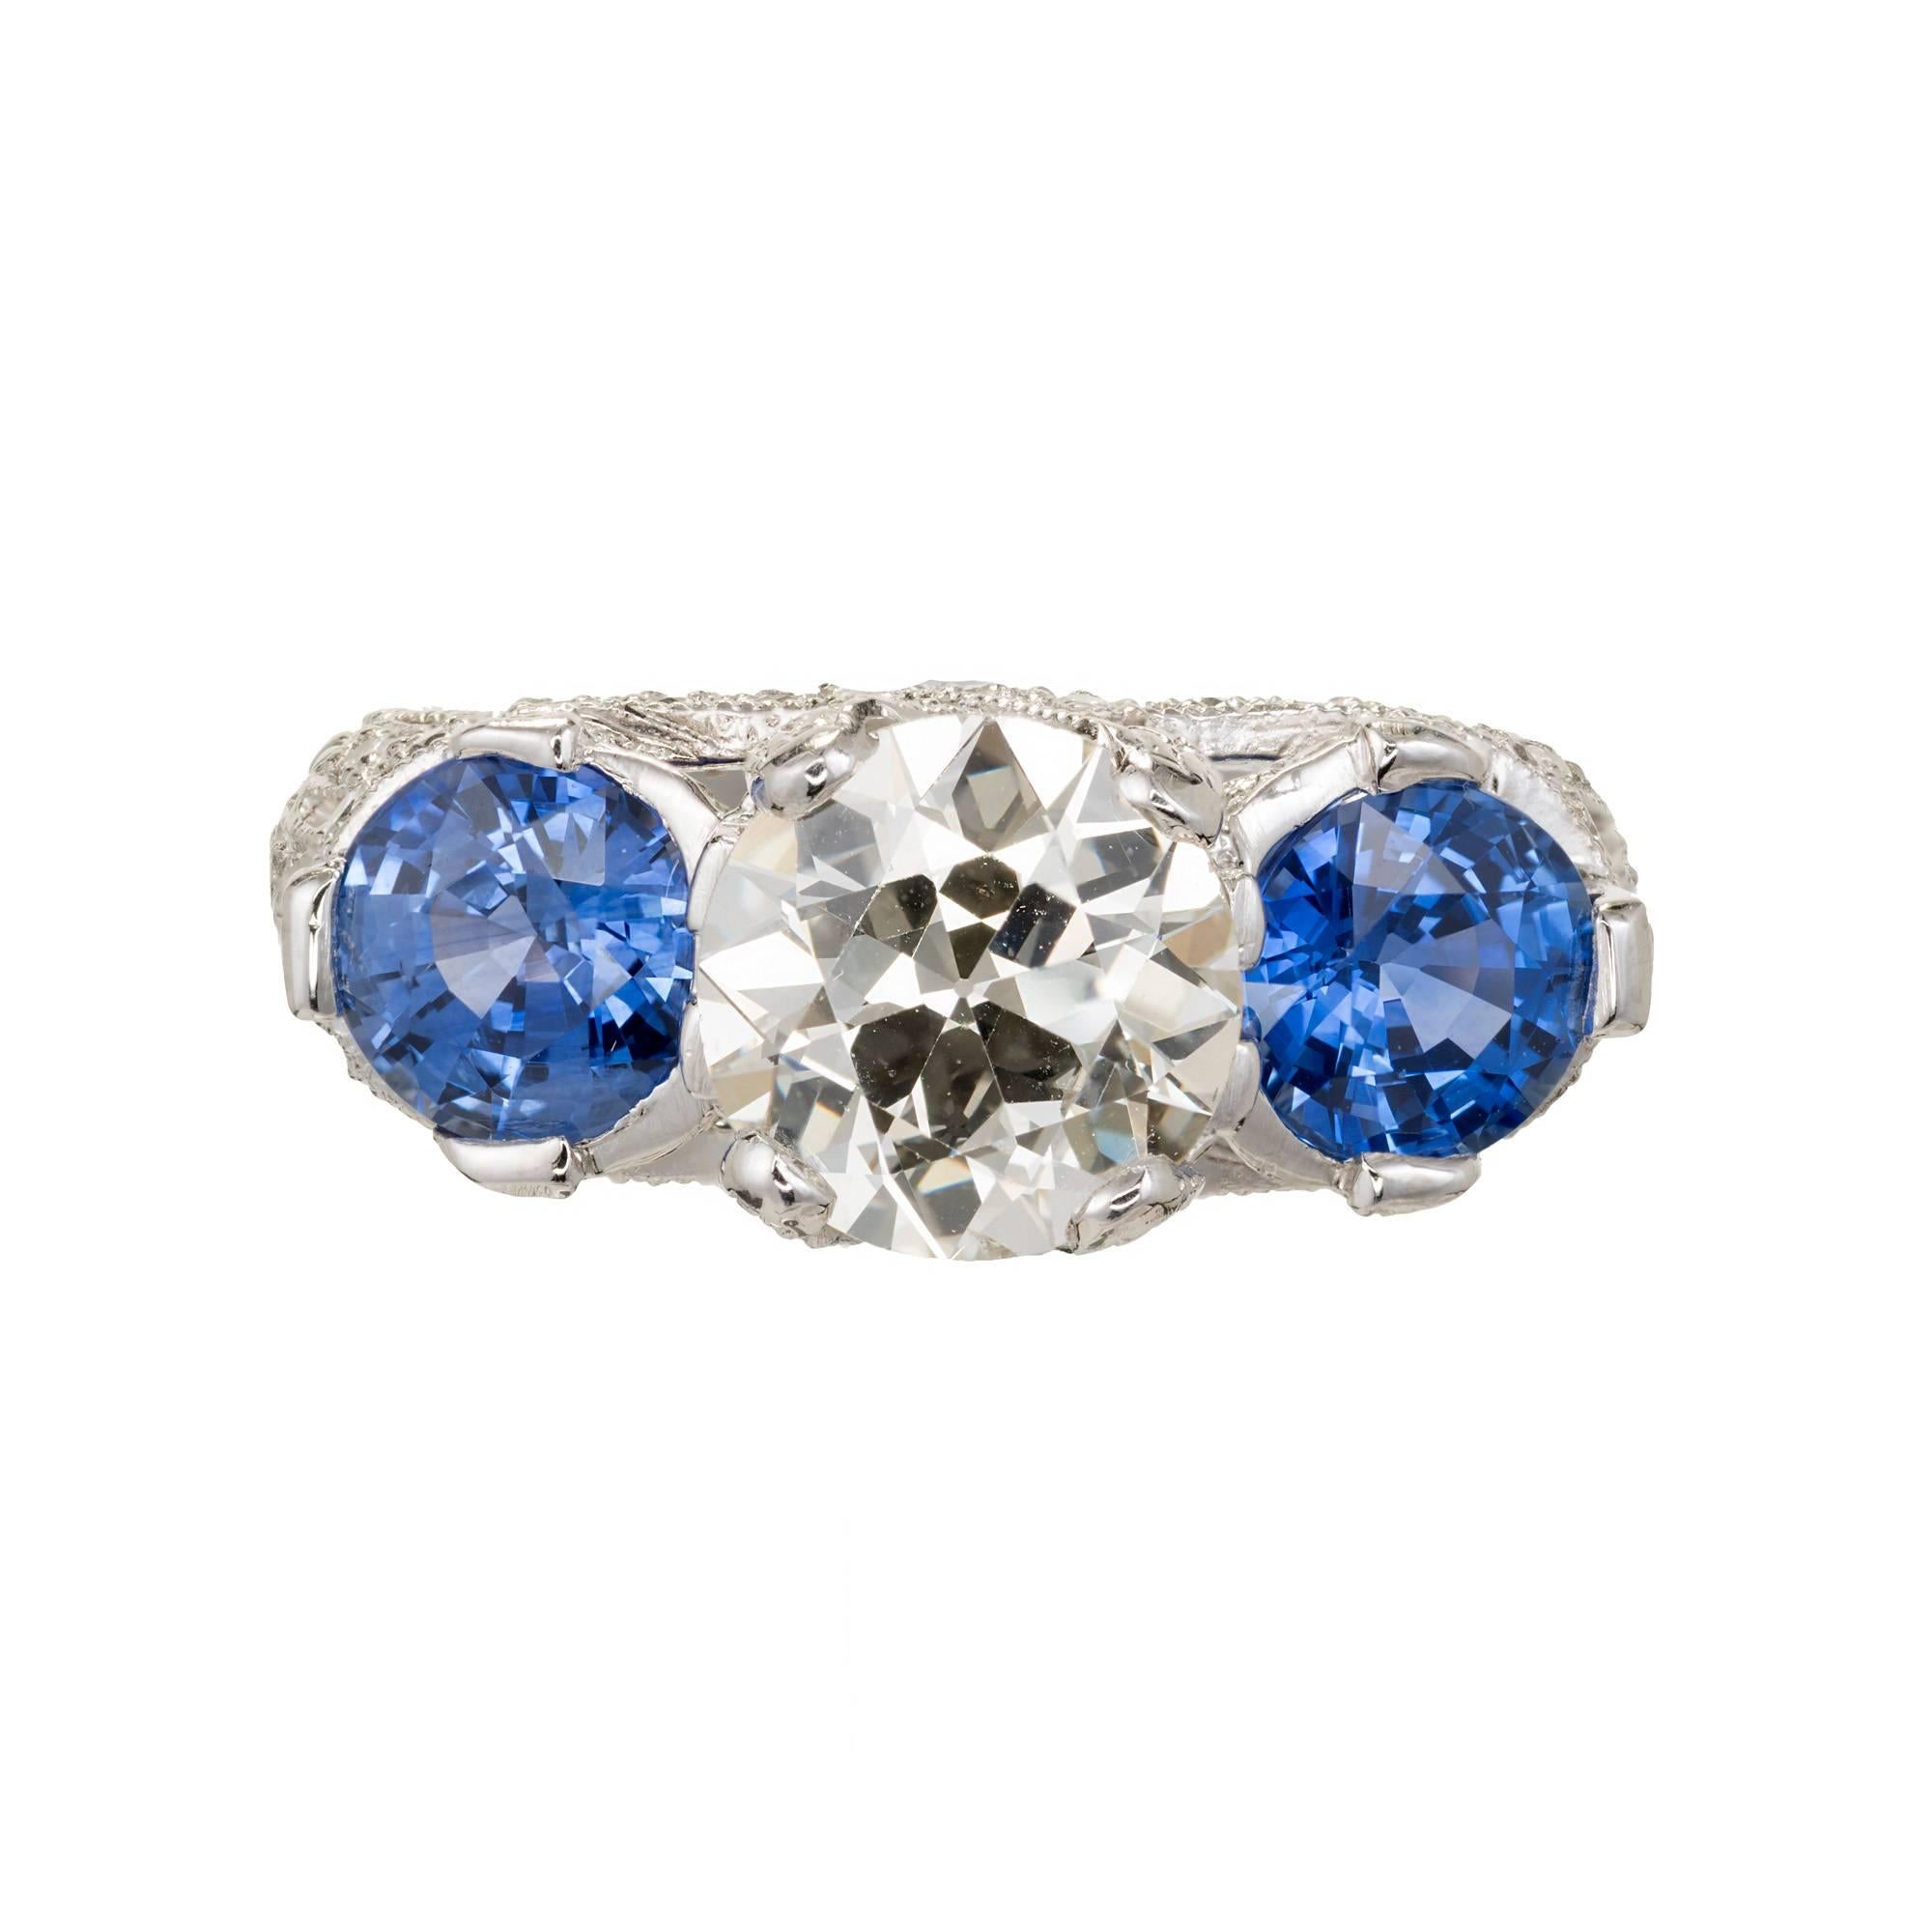 Peter Suchy three-stone diamond and sapphire engagement ring.  The center diamond is a sparkly, circular brilliant cut GIA certified #2175591686. The sapphires are also circular brilliant cut with great sparkle as well. simple heat natural. The